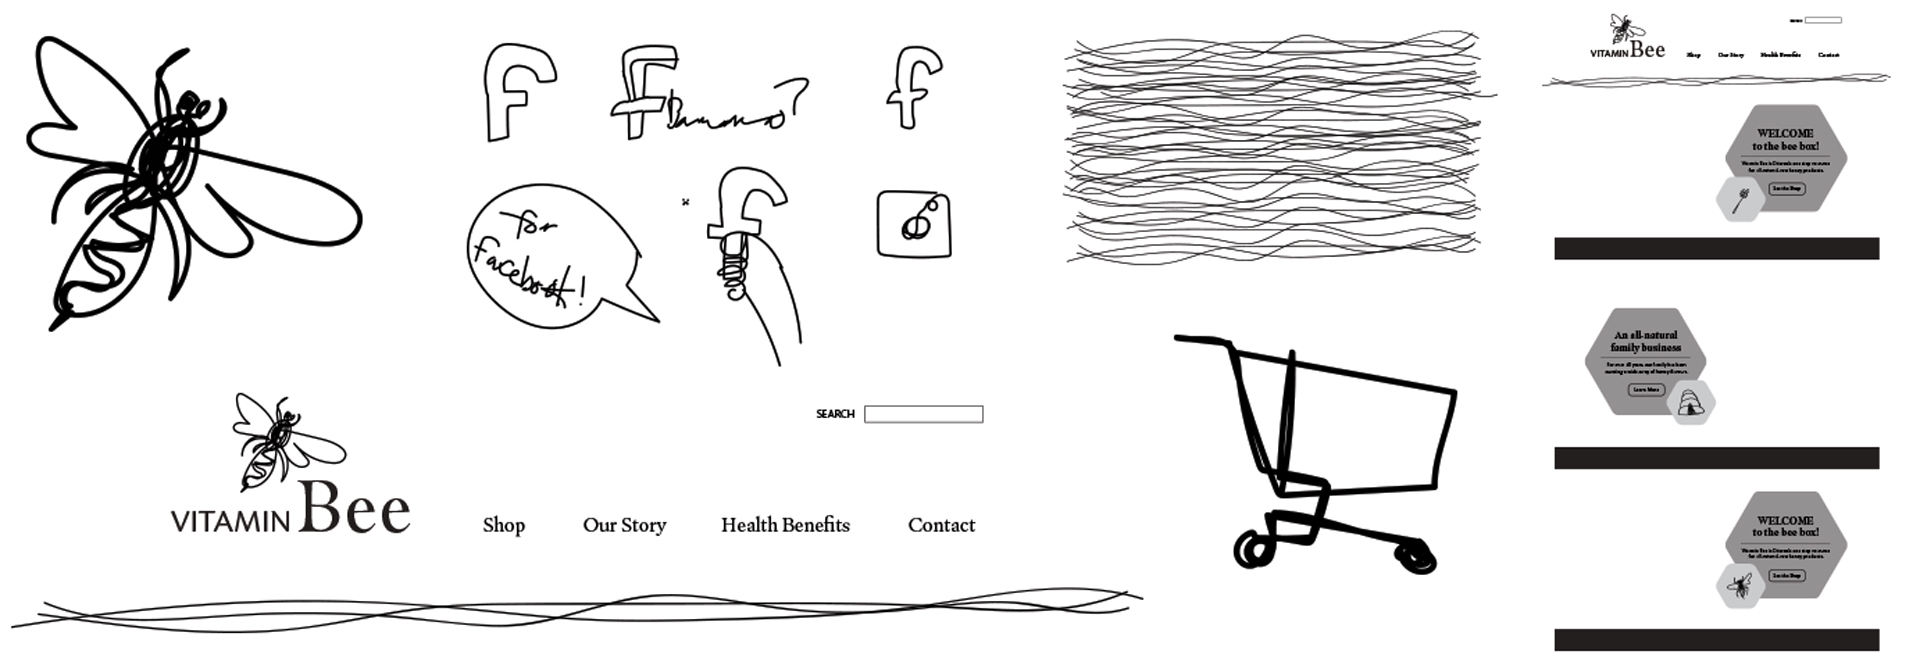 Vitamin Bee sketches, showing the header and prototype wireframe.